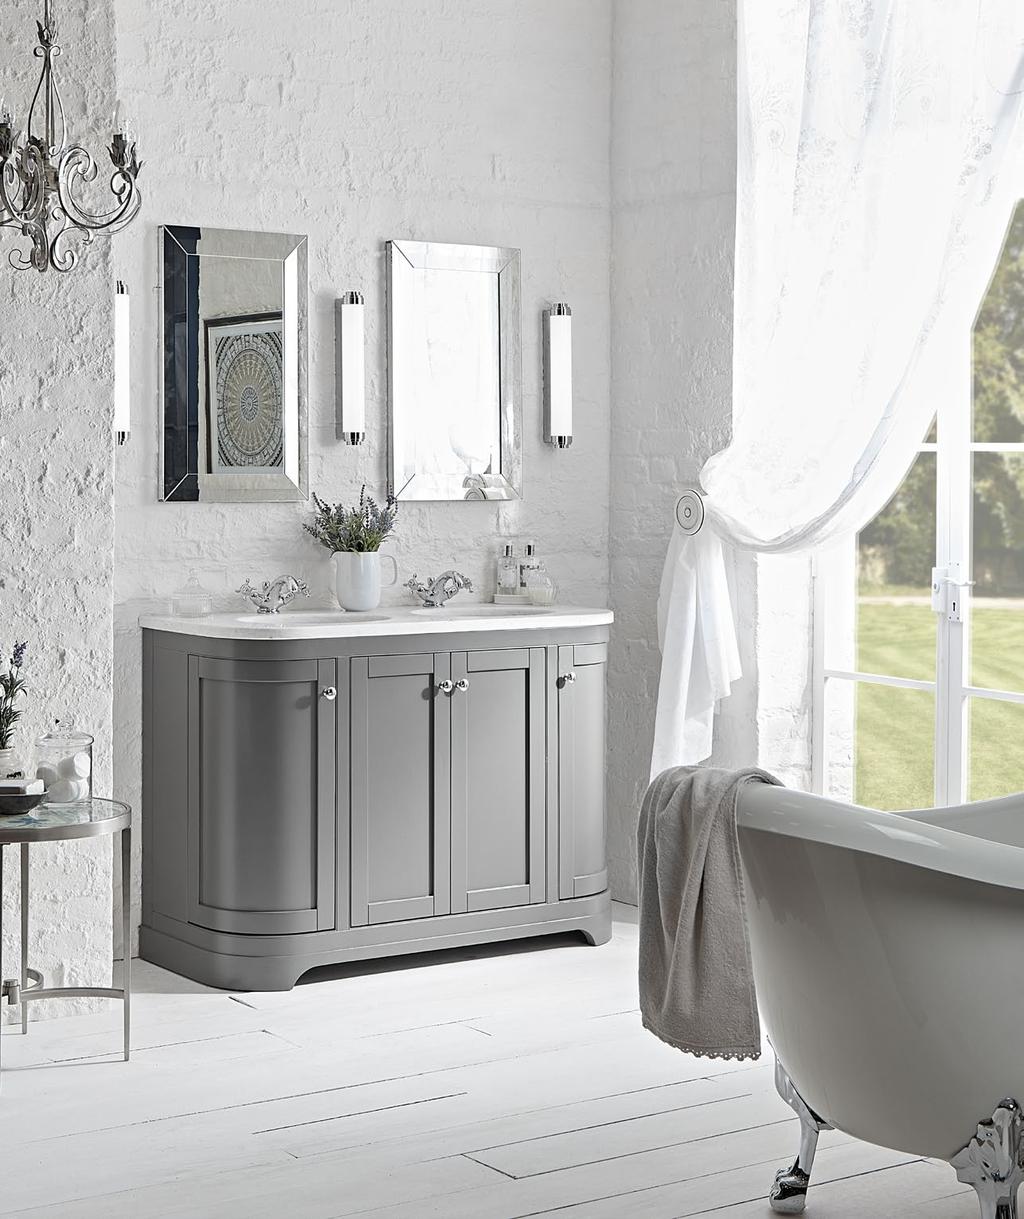 MARLBOROUGH Quality and Craftsmanship A classic collection with shaker styling, our Marlborough range incorporates units with five piece doors which are finished with adjustable soft close hinges.